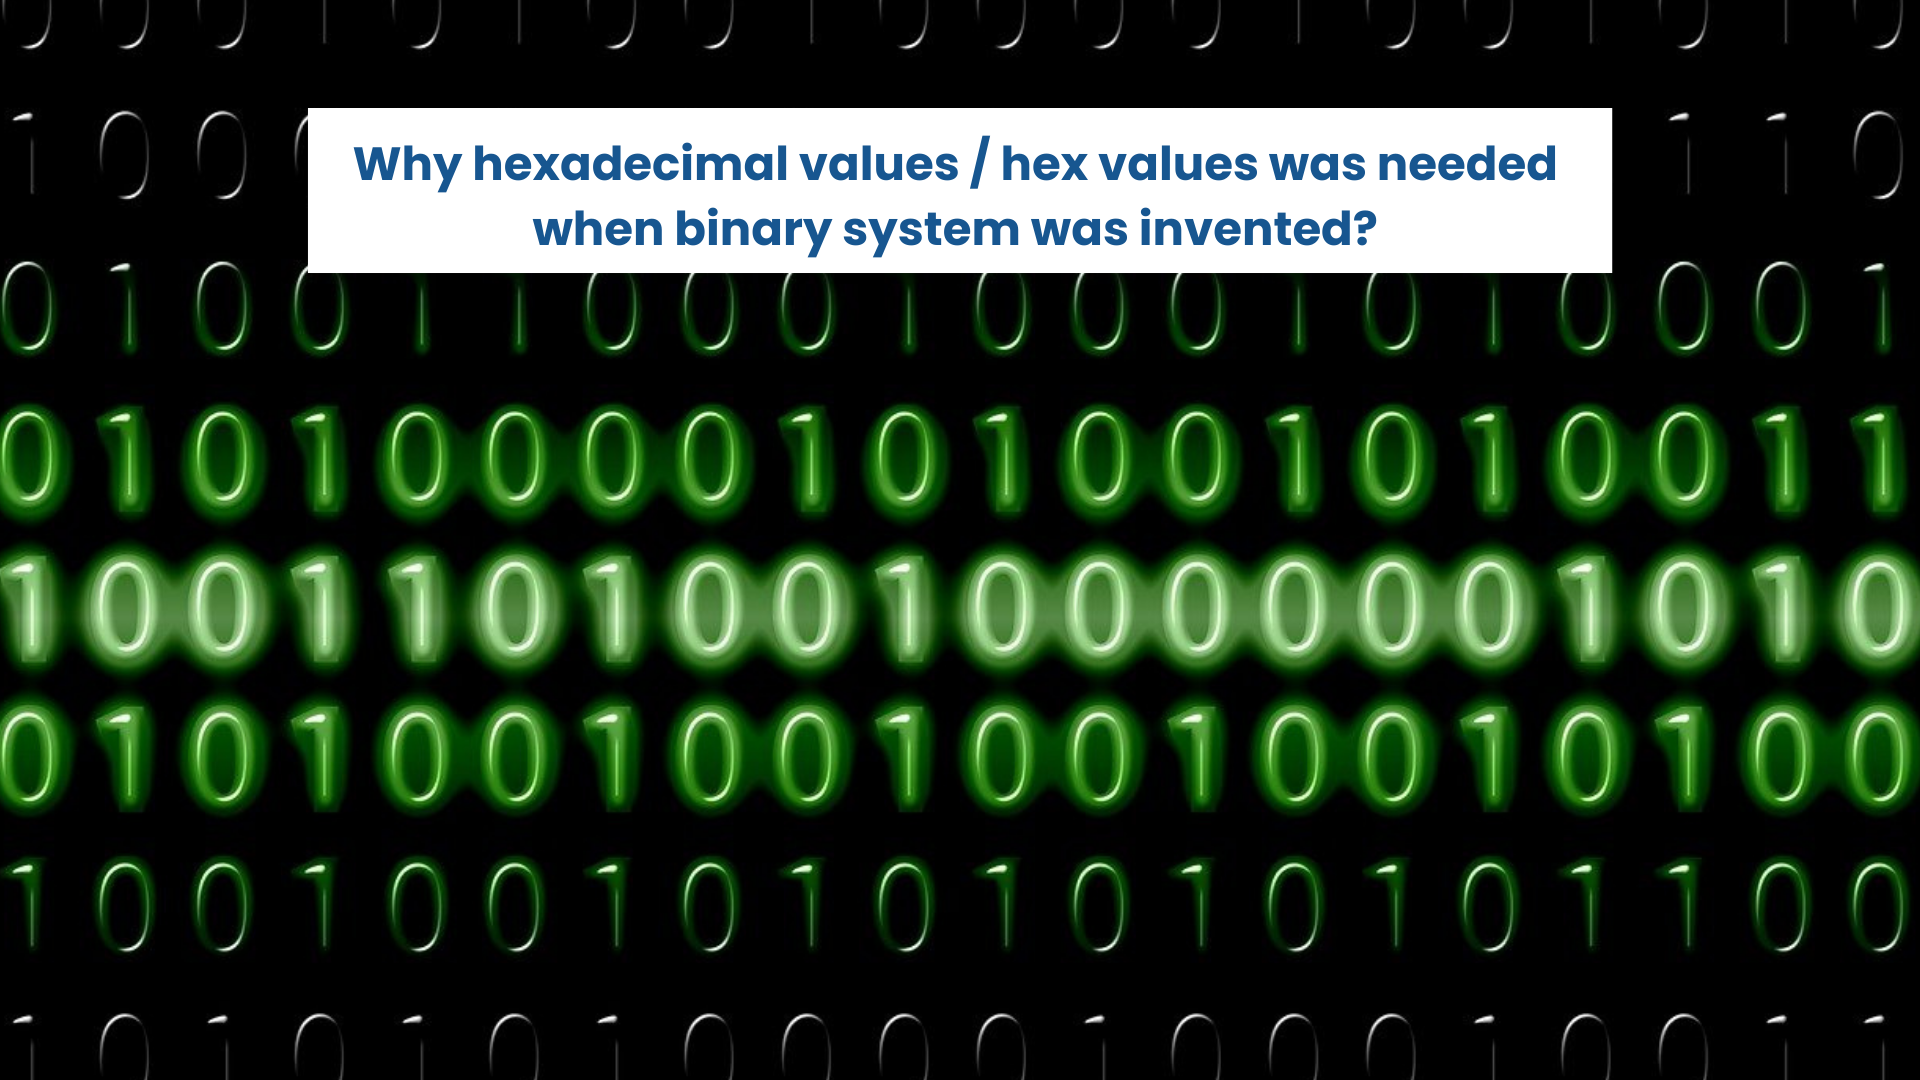 Why hexadecimal values / hex values was needed when binary system was invented?